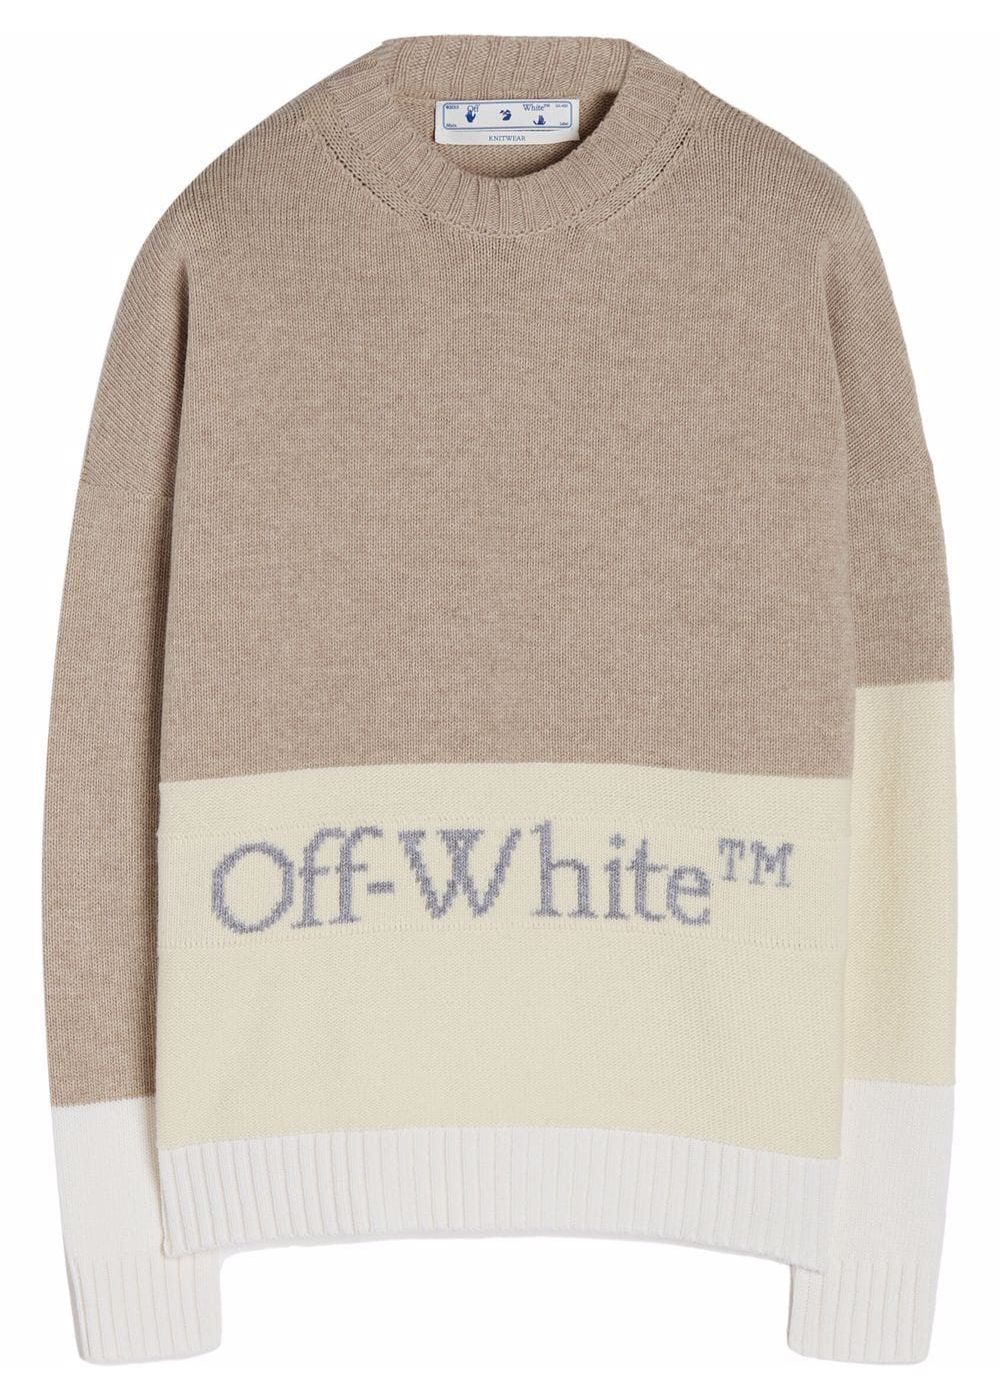 OFF-WHITE Colour Block Knitted Crewneck Beige Natural White